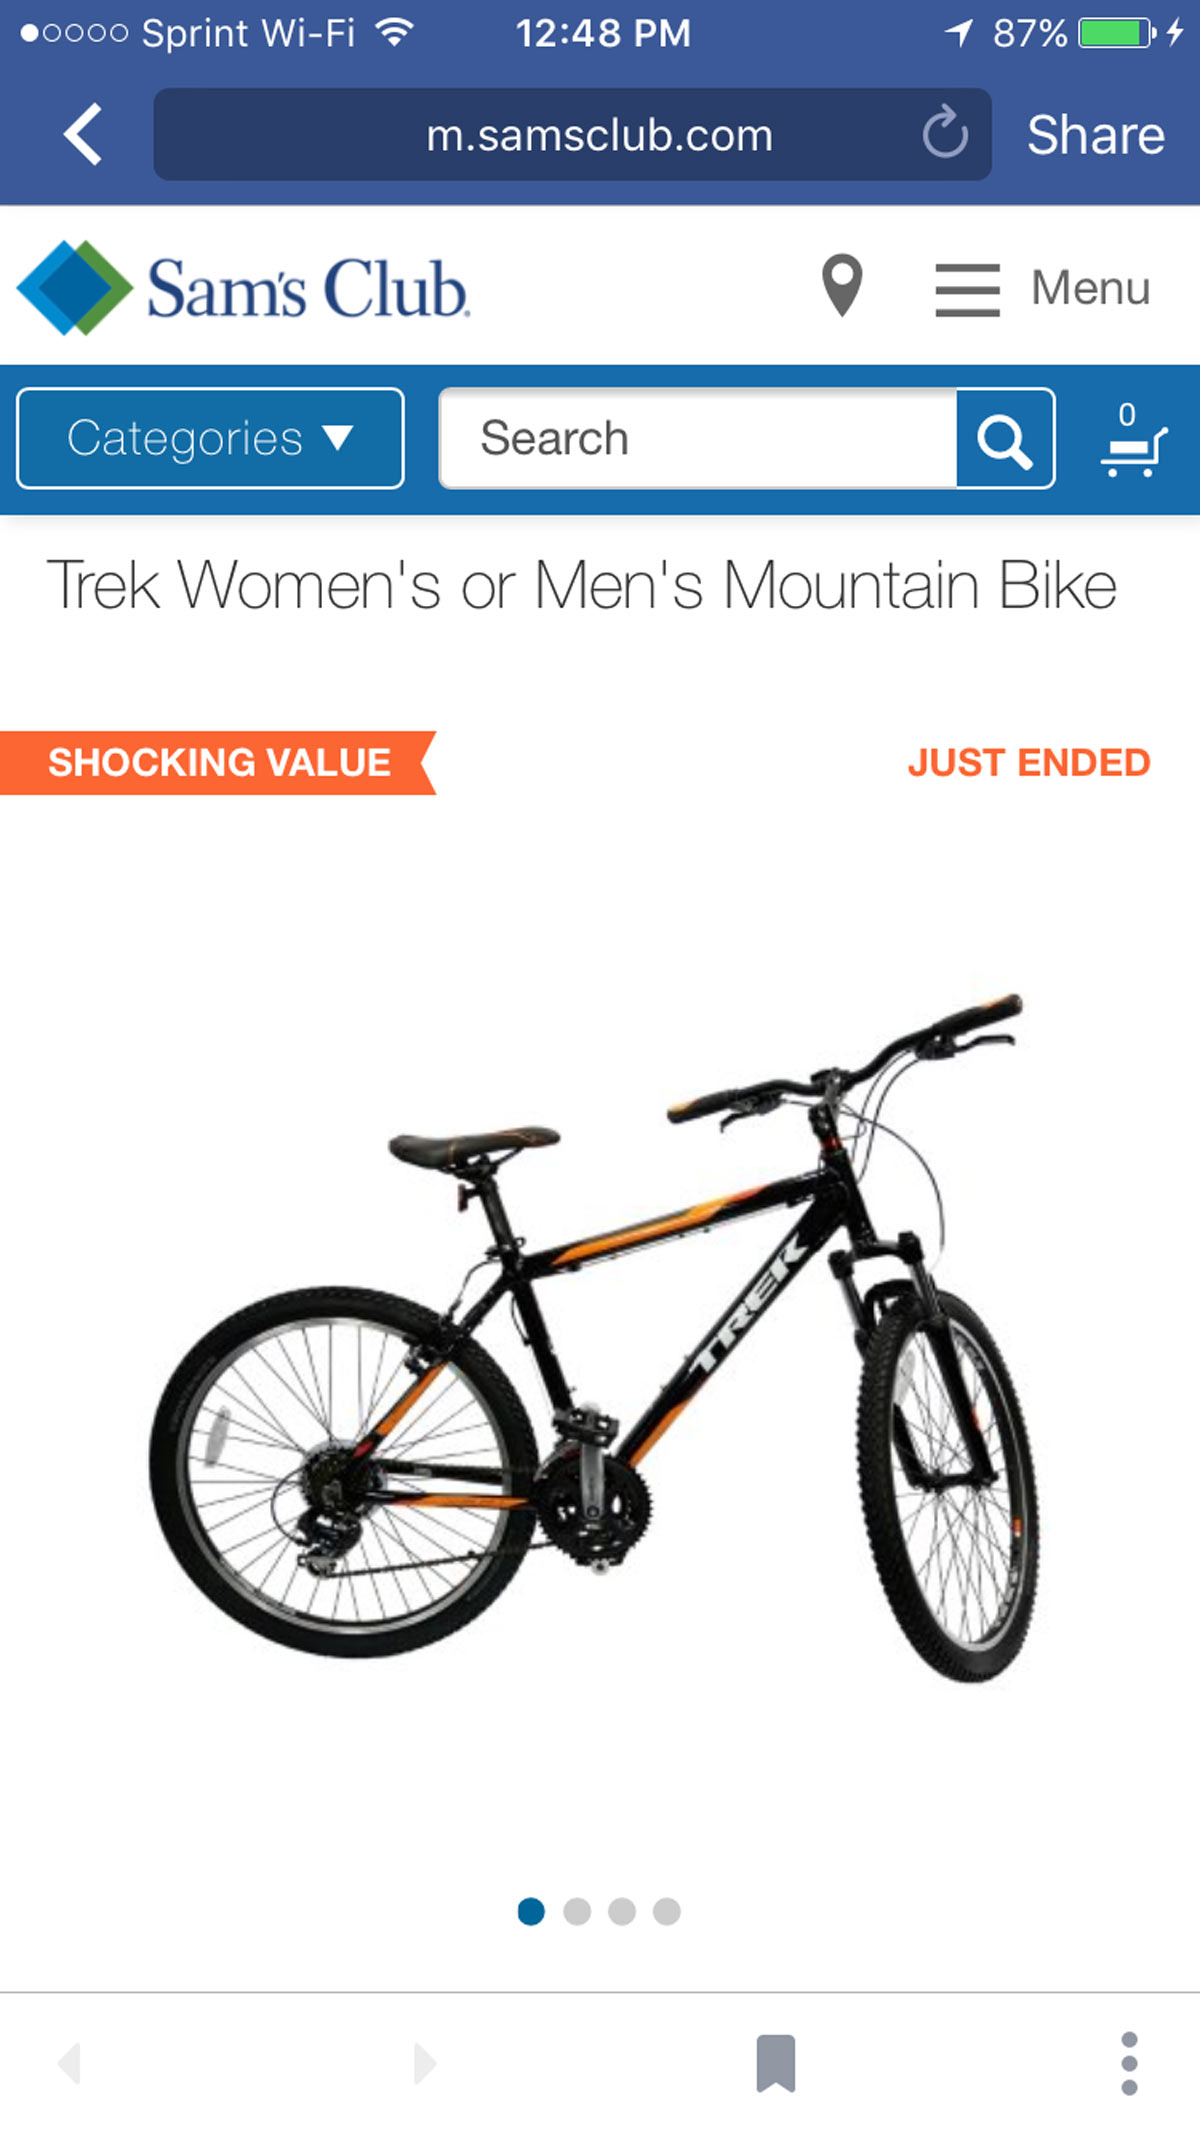 After bikes show up for sale at Sam's Club, Trek says 'Not so fast' -  Bikerumor